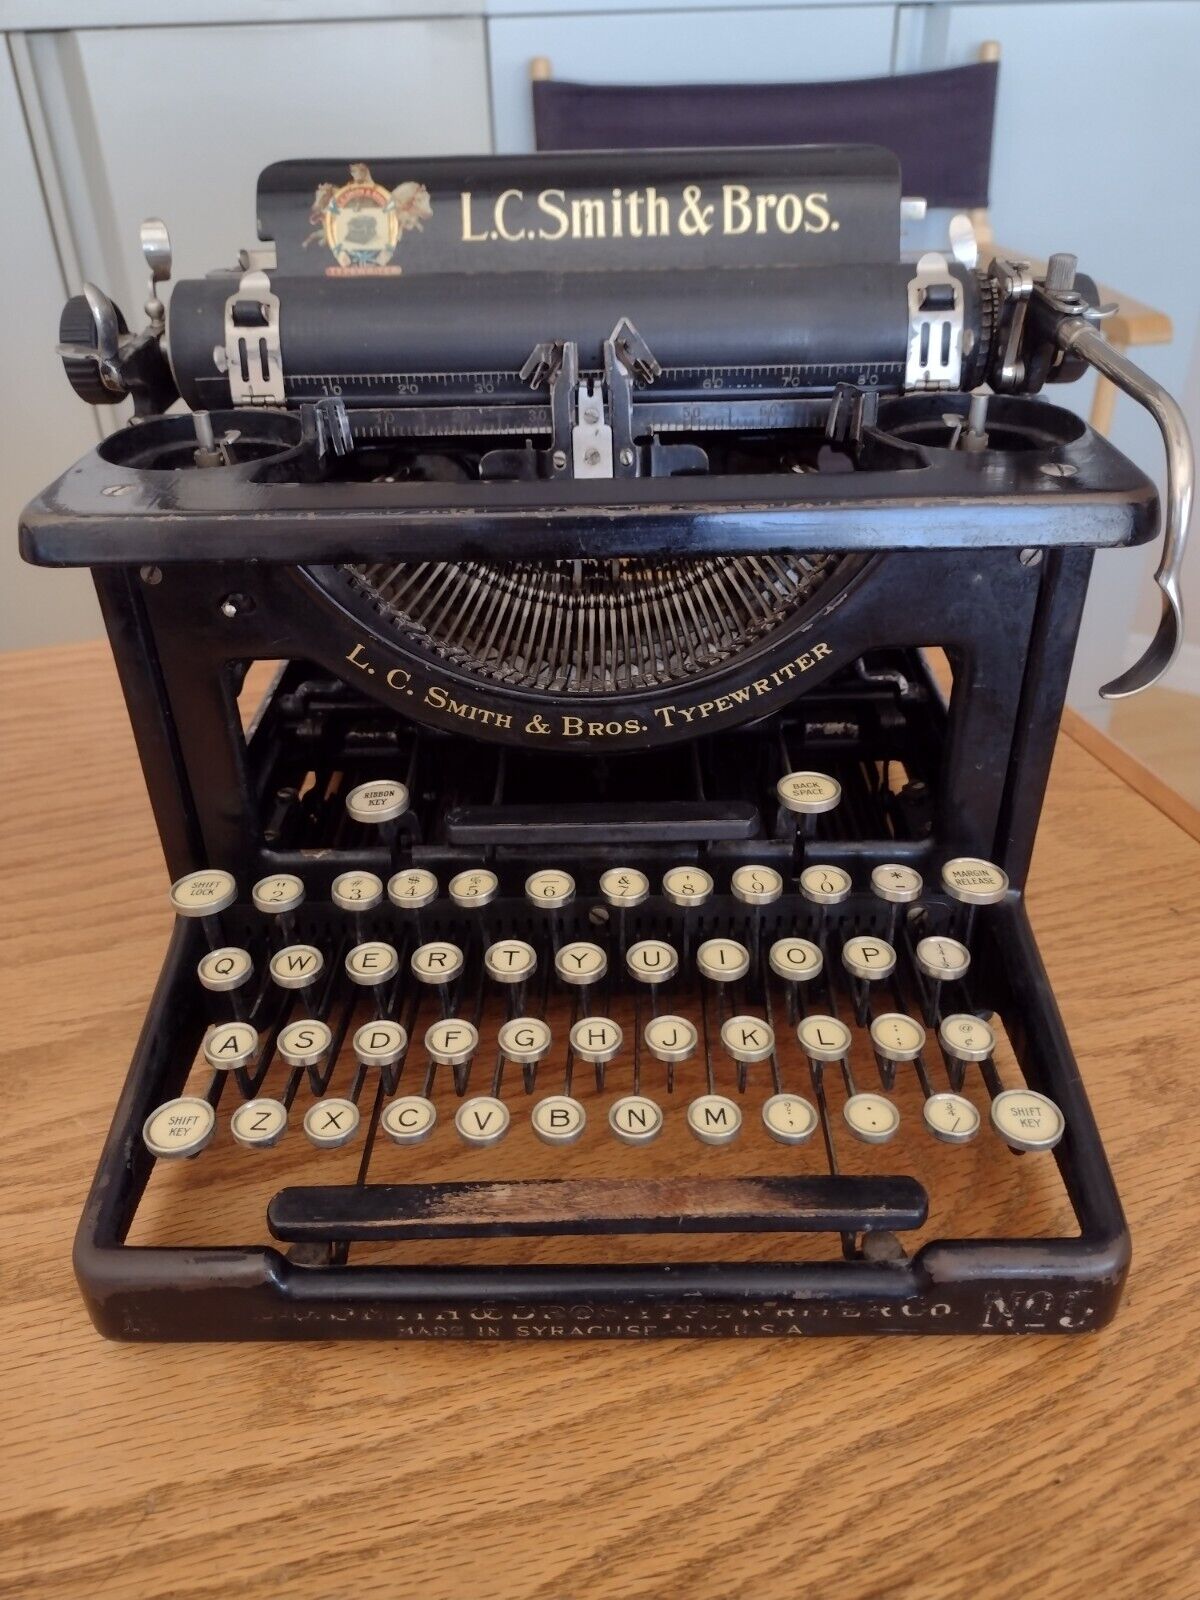 L.C. Smith & Bros. No.3 Vintage 1920s Typewriter - Sold as is